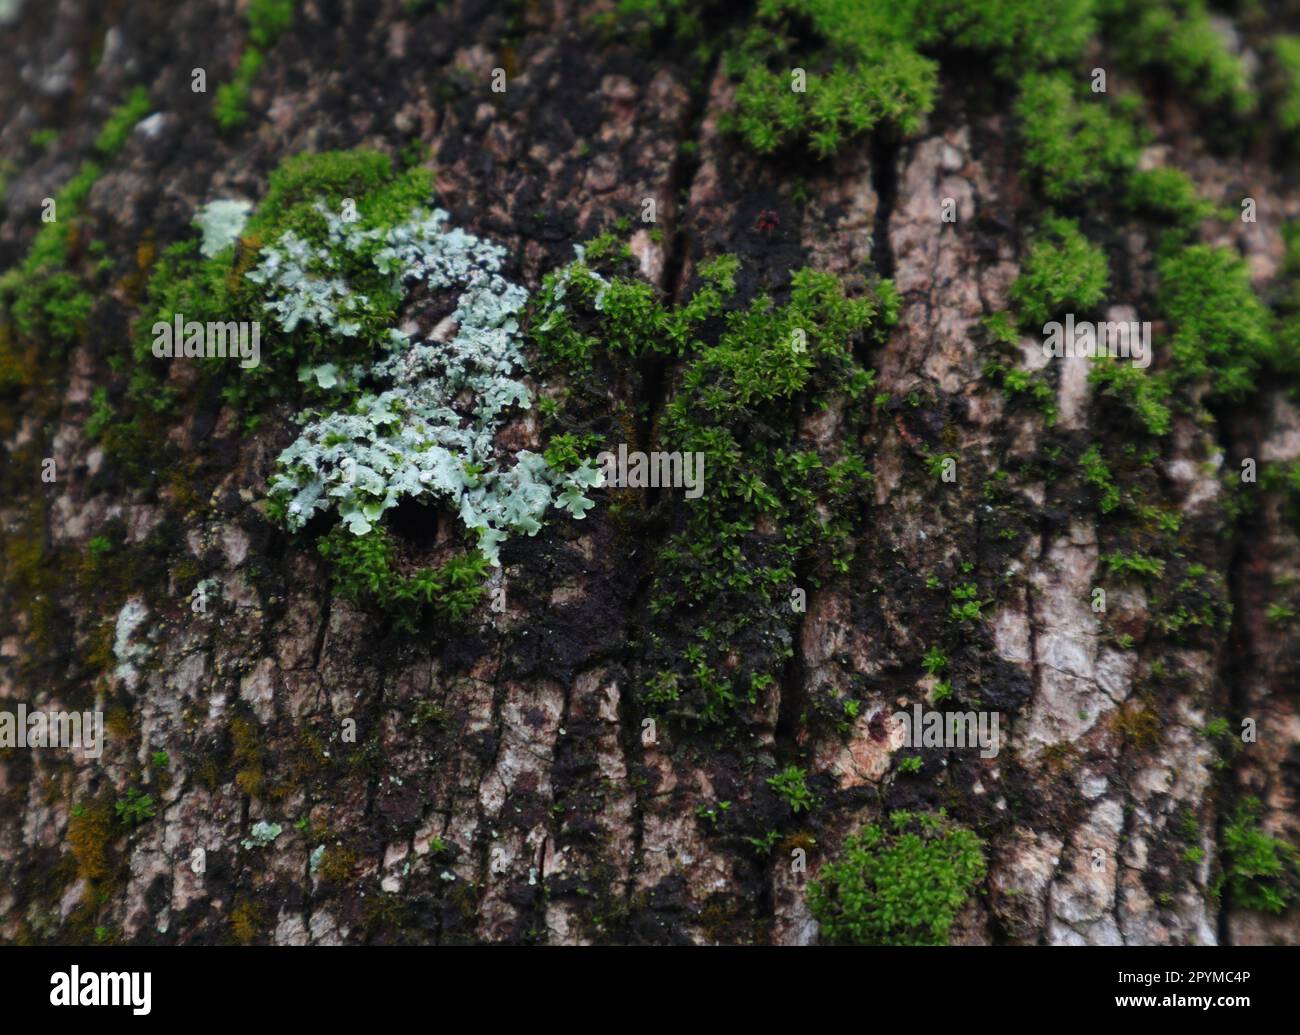 Wallpaper view of the white lichen (Parmelia Sulcata) with the green Moss and algae growing on the surface of a Coconut trunk Stock Photo